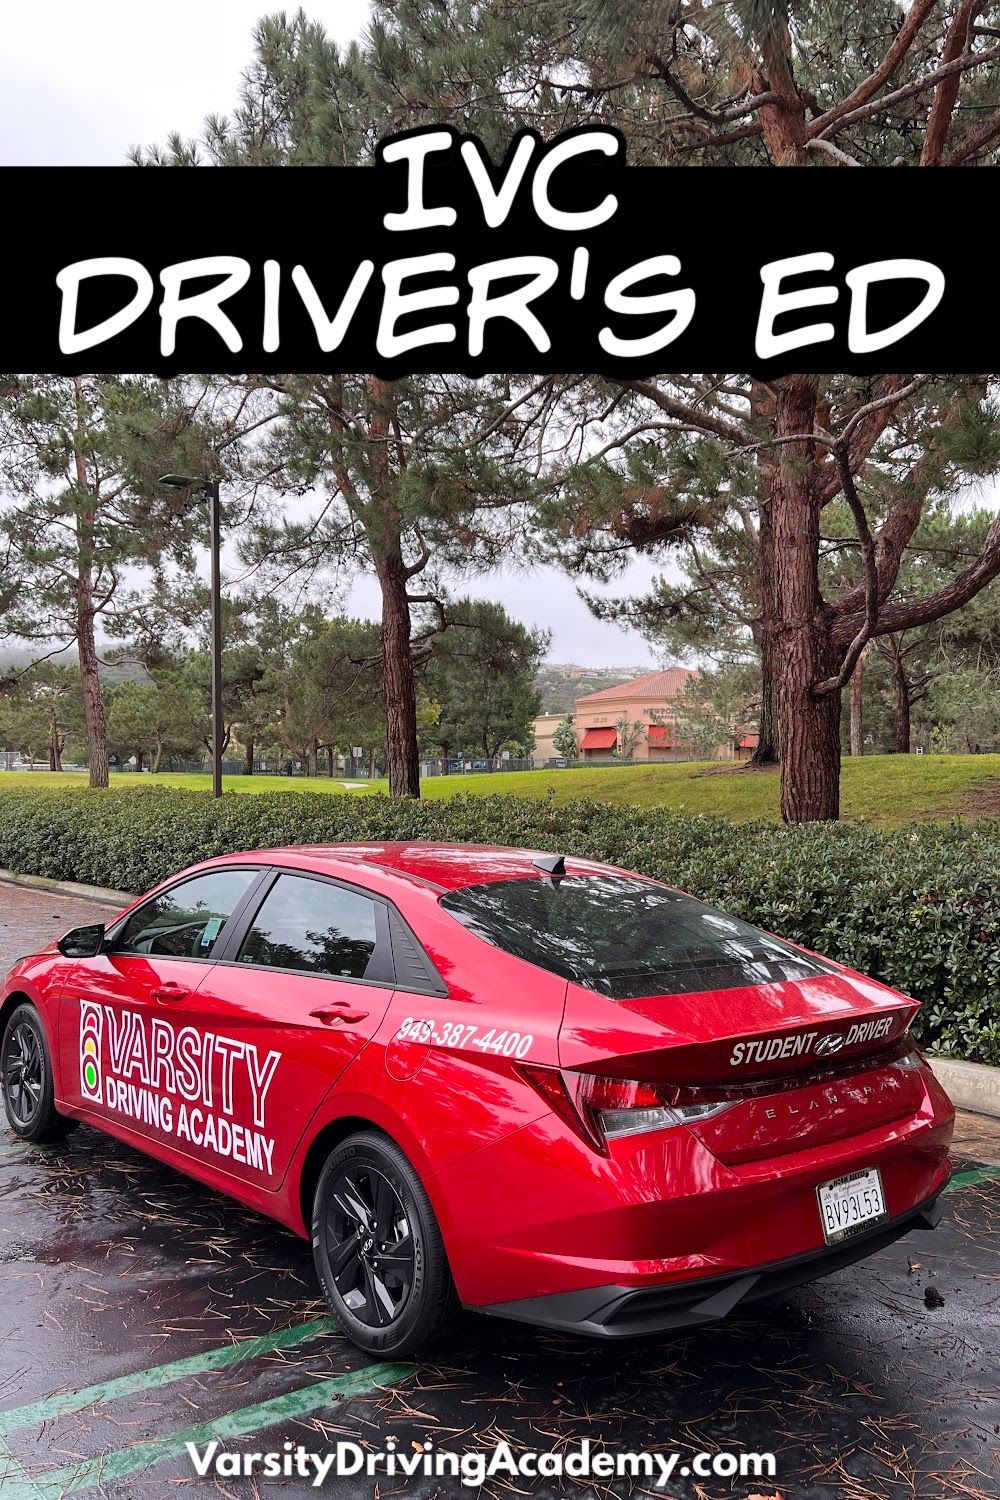 Varsity Driving Academy is where you will find the best IVC driver's ed program to learn how to drive defensively.